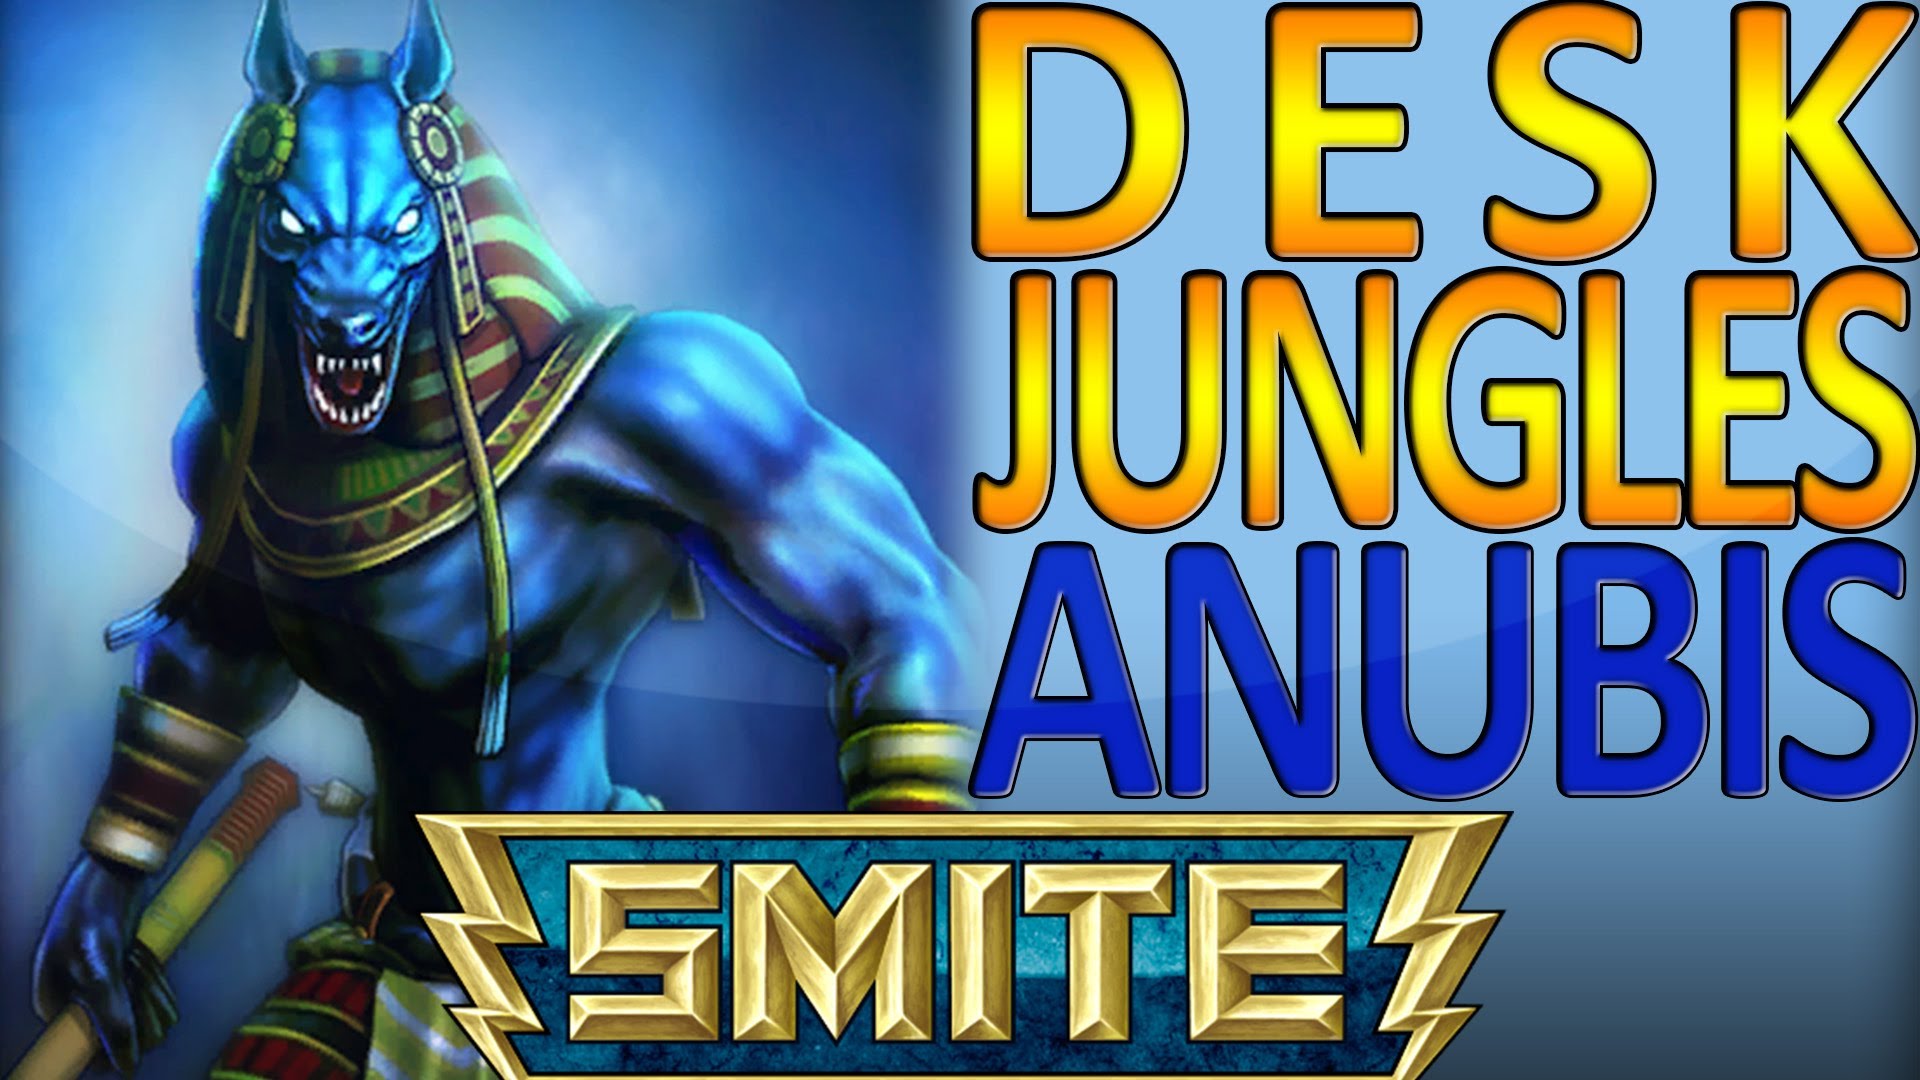 Displaying Images For Smite Anubis Wallpaper